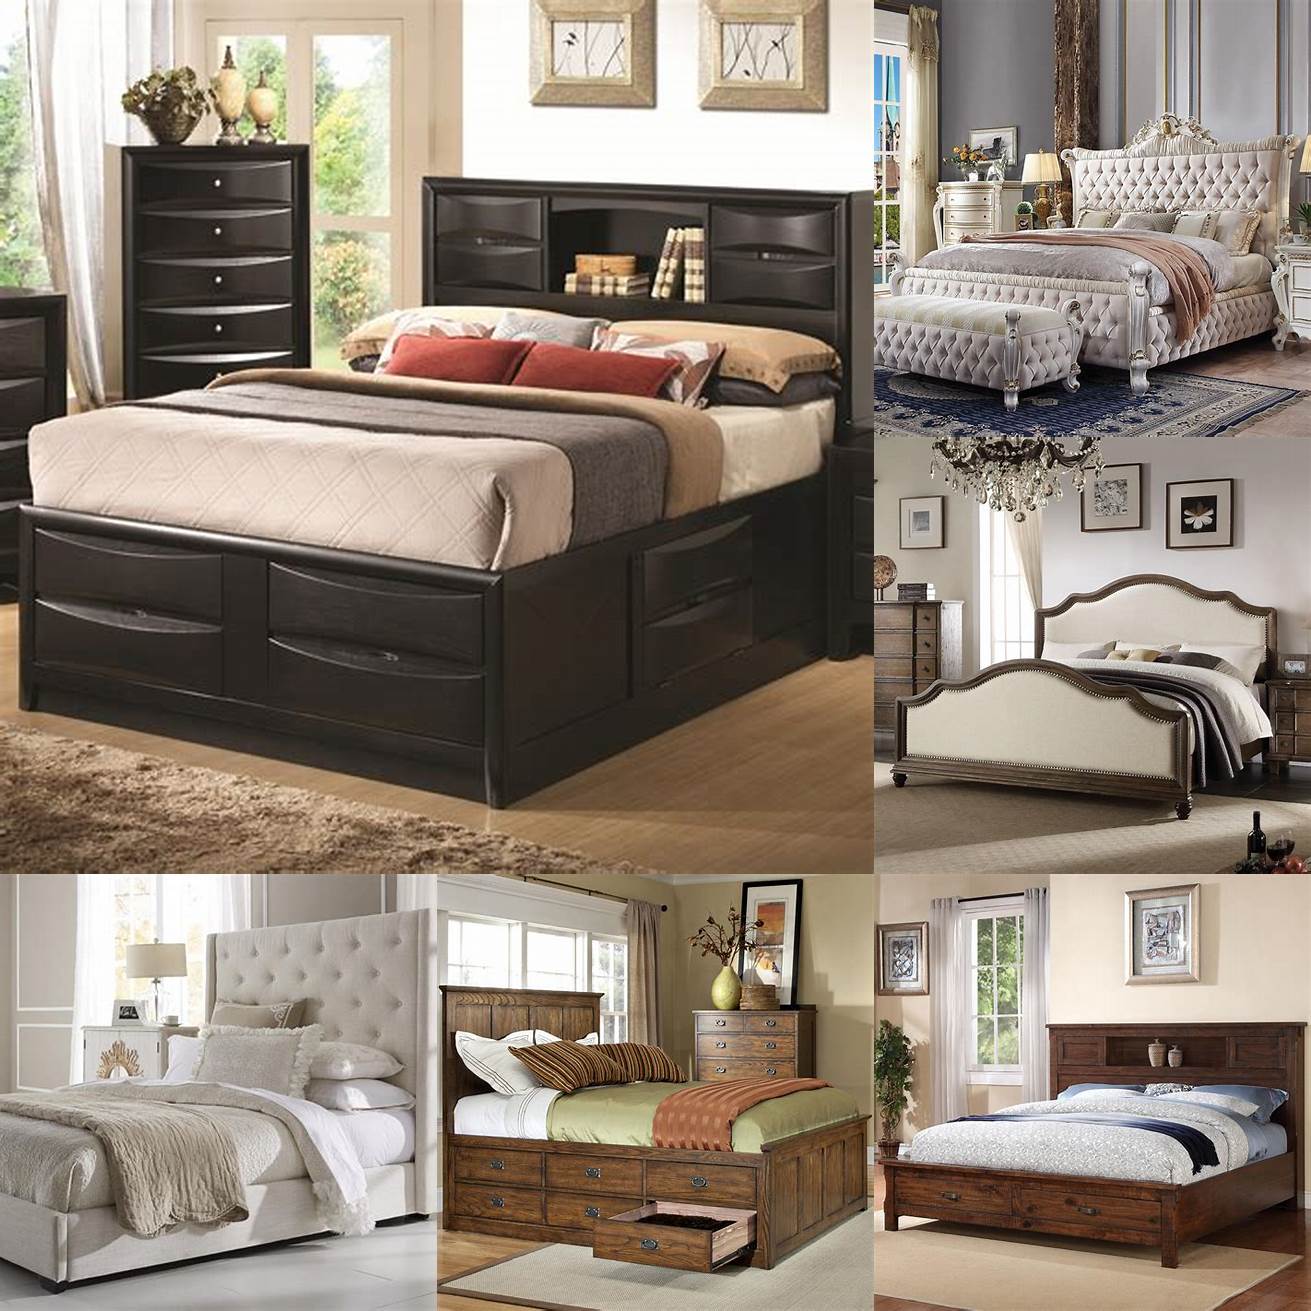 California King Size Bed Frame with Headboard